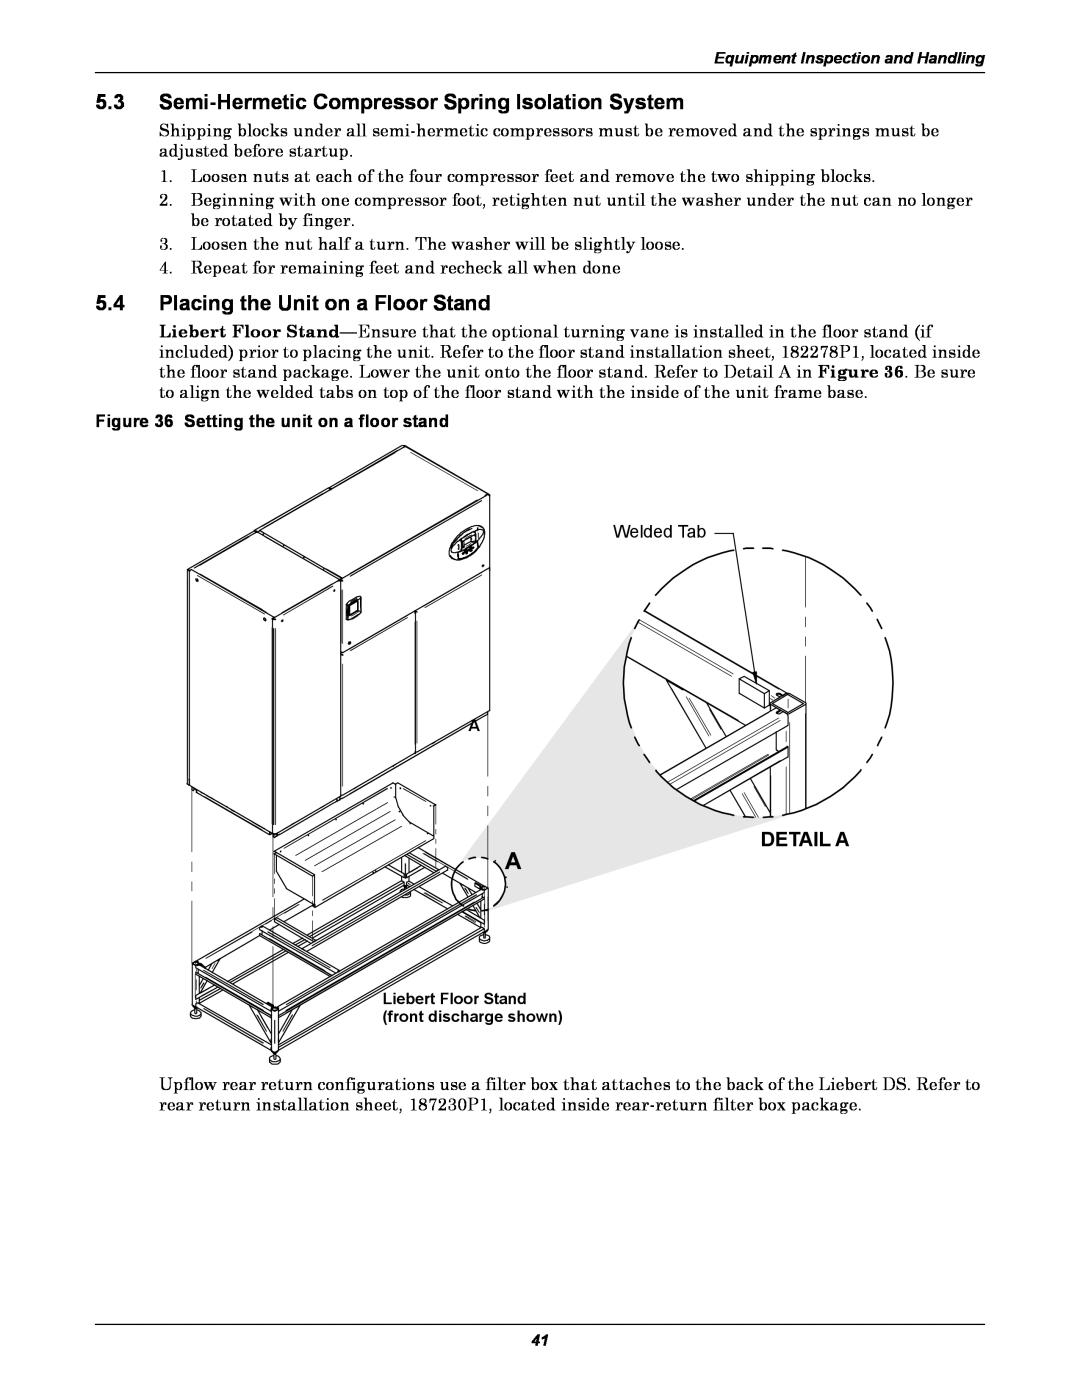 Liebert DS user manual Semi-Hermetic Compressor Spring Isolation System, Placing the Unit on a Floor Stand, Detail A 